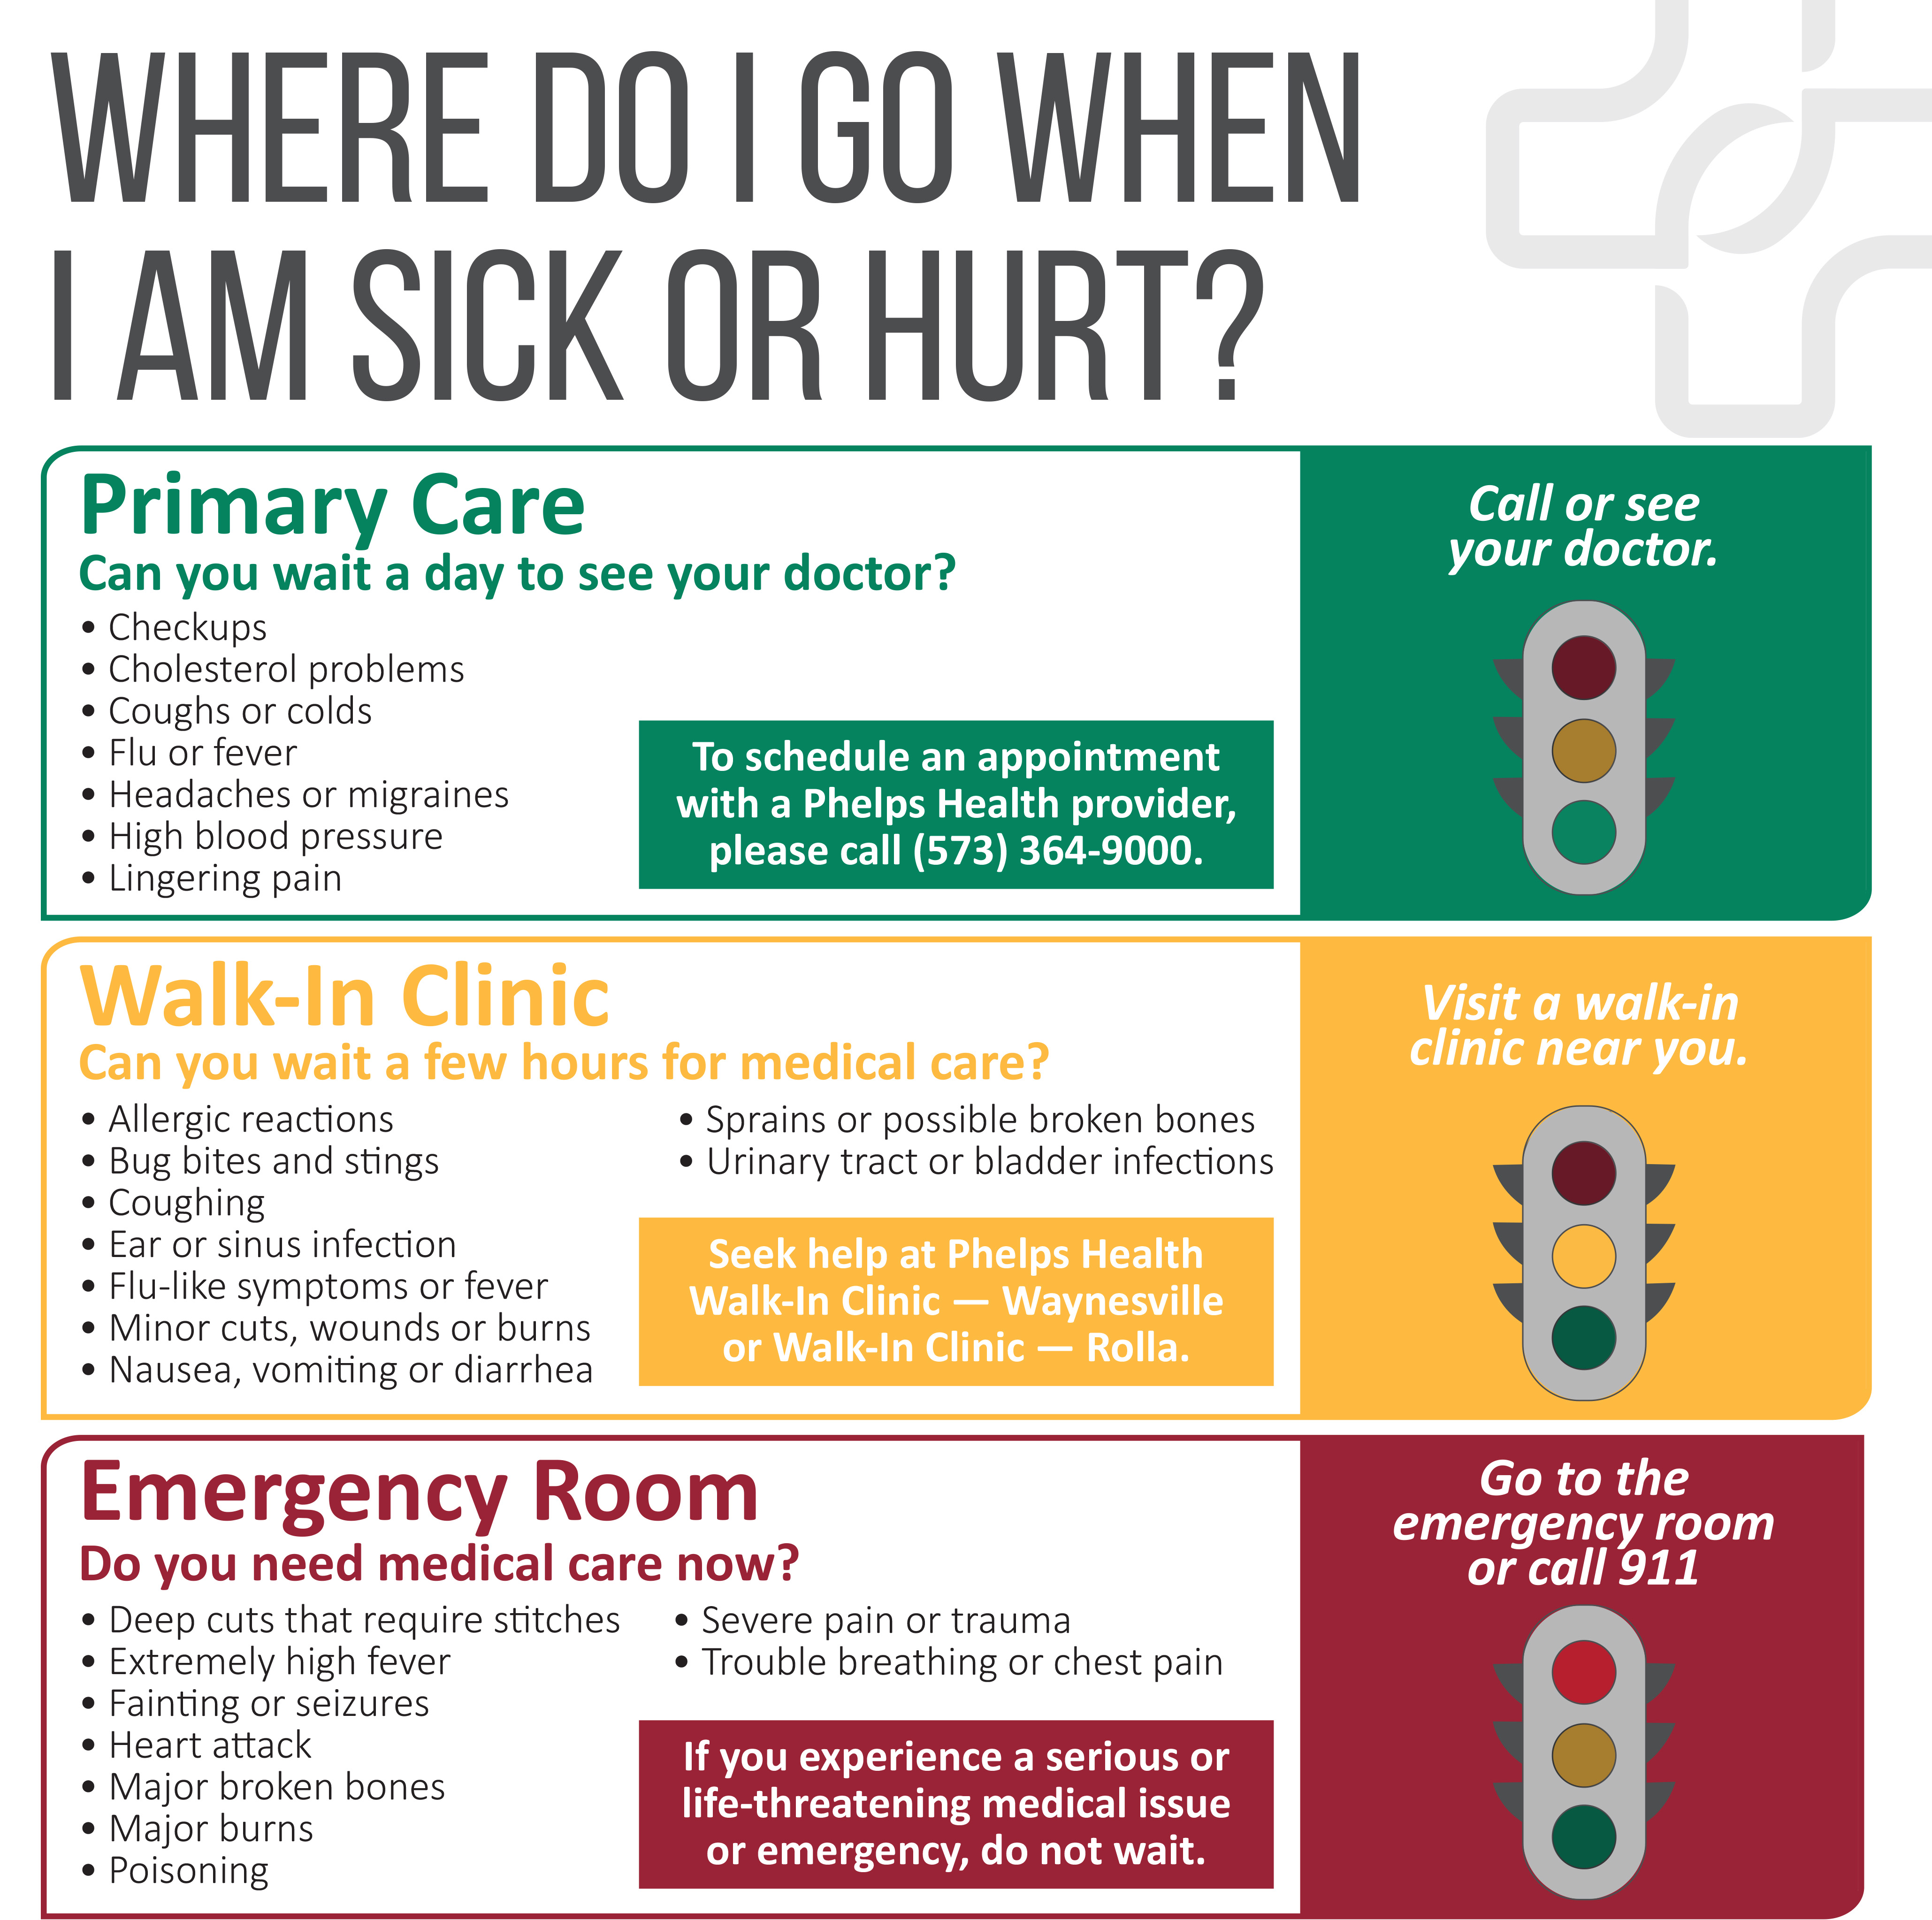 Where to go when I am sick or hurt stoplight flyer